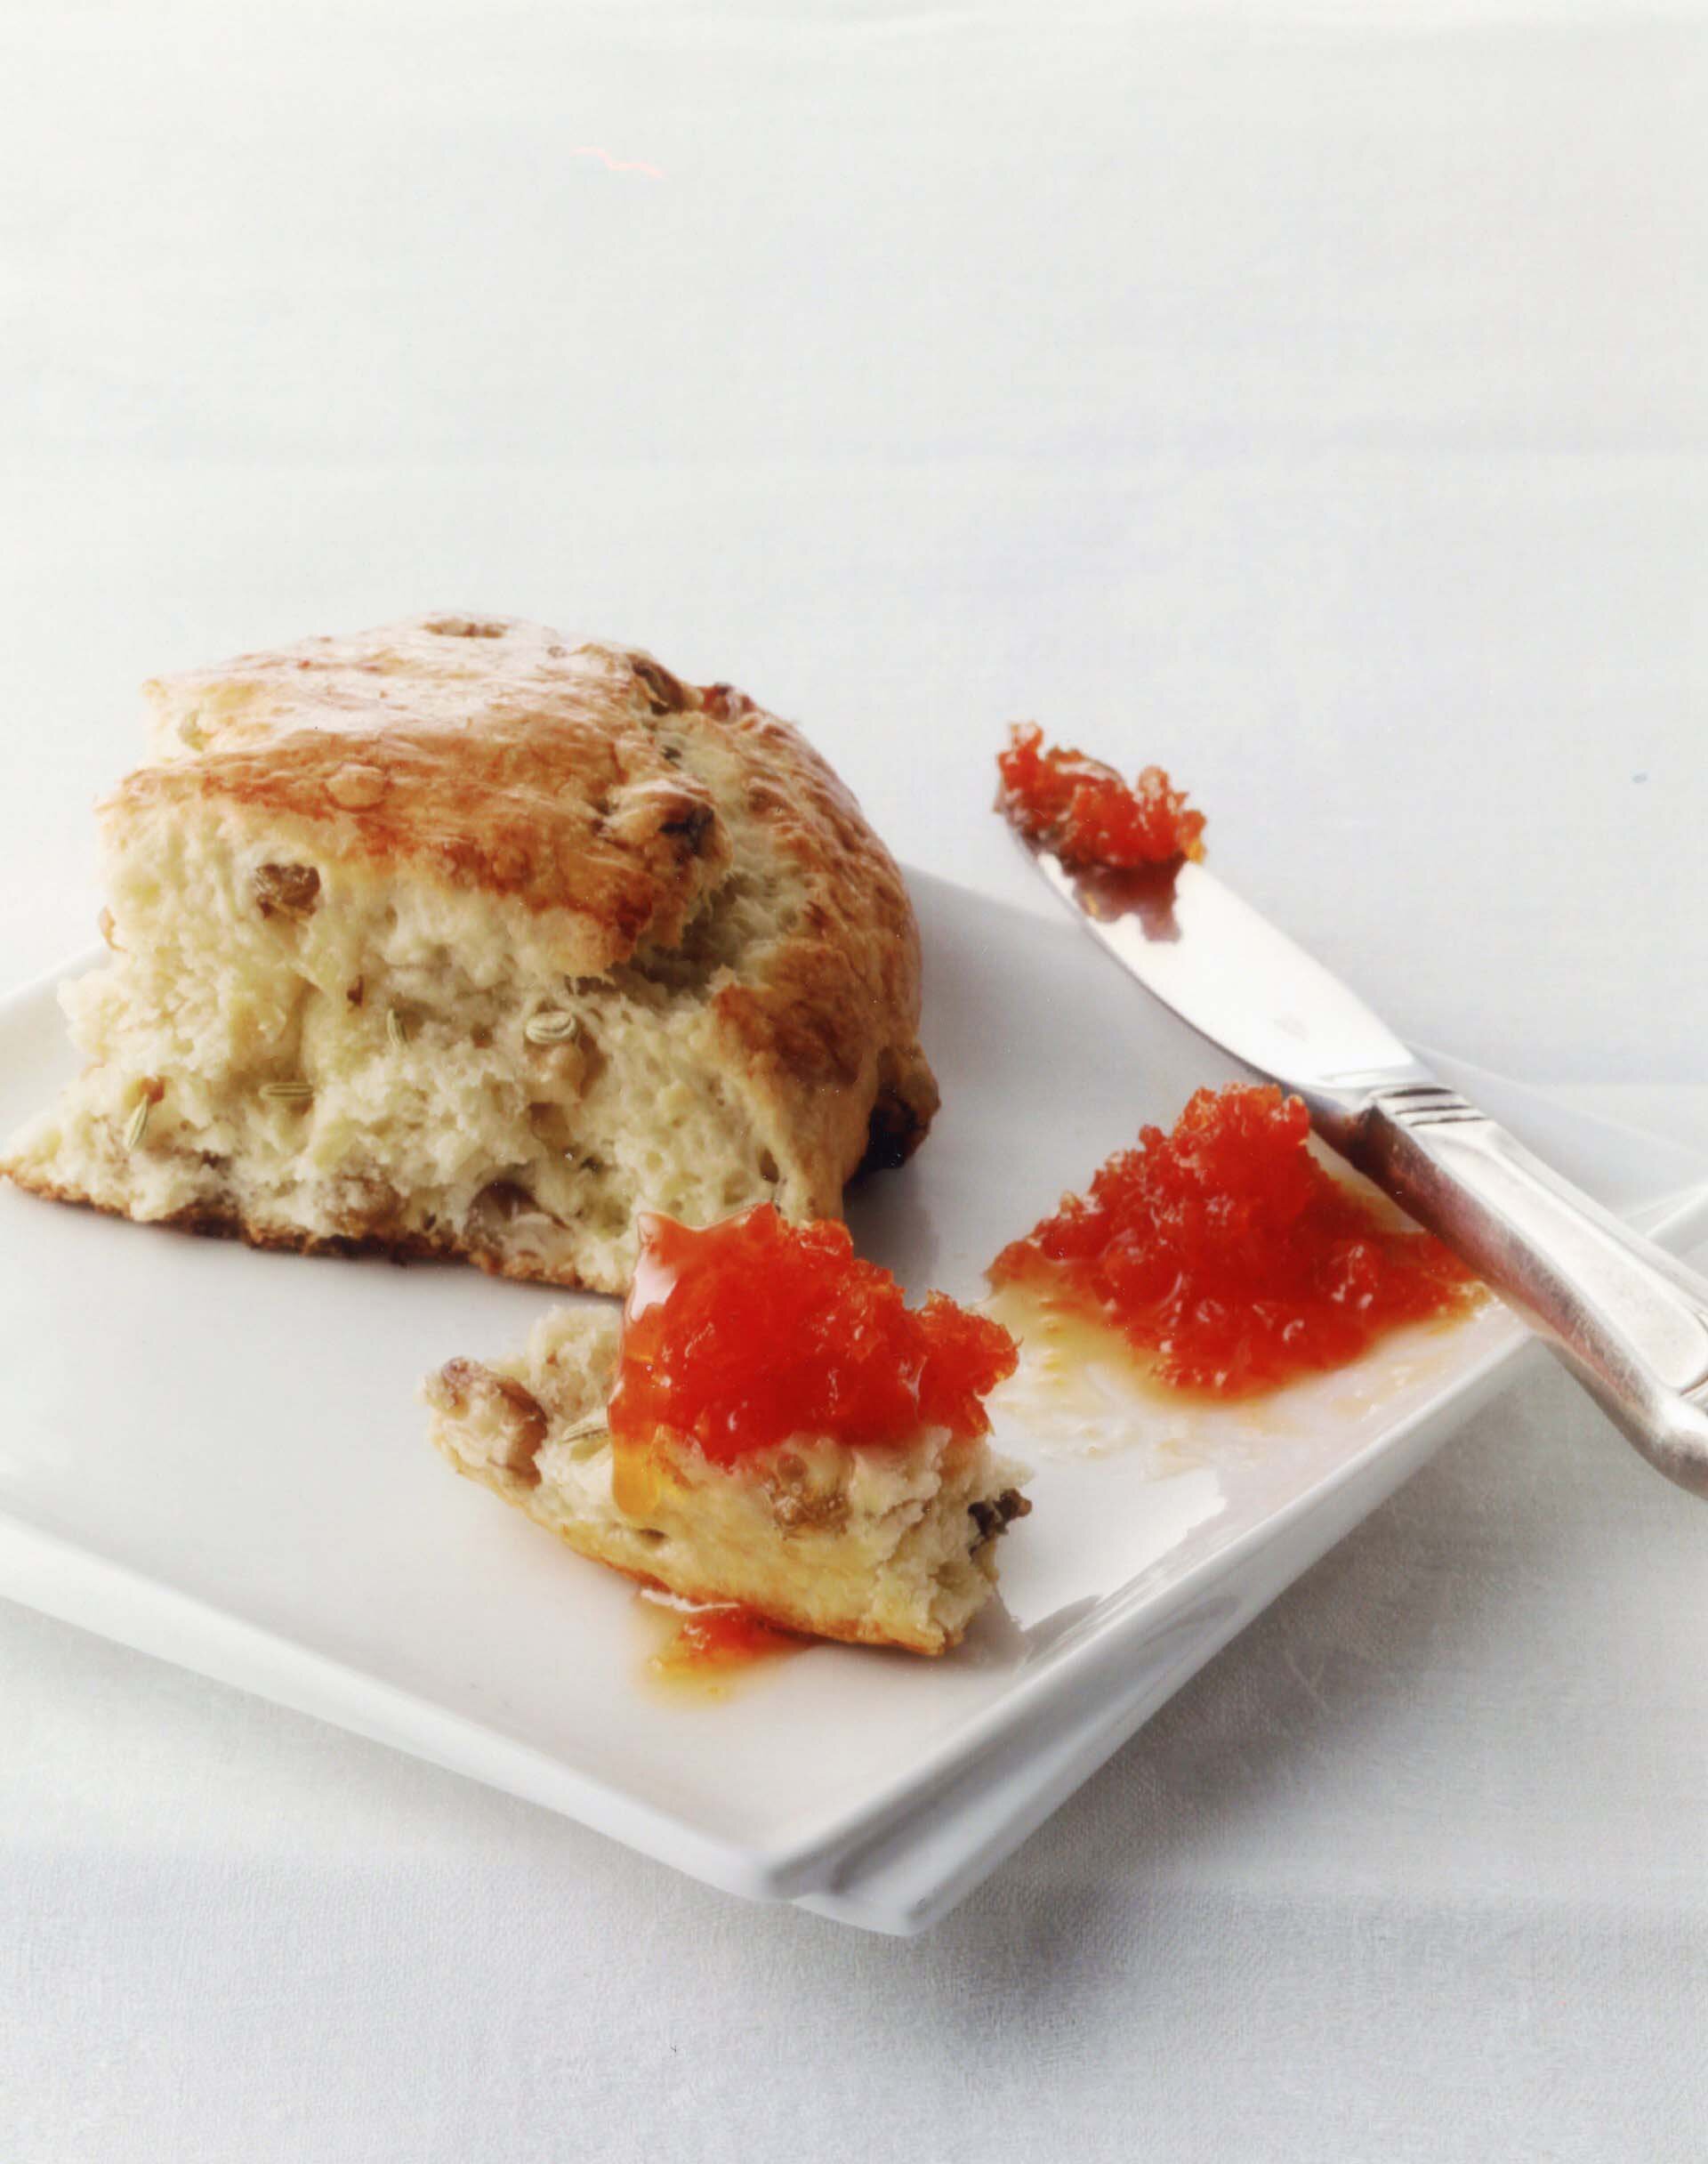 Fennel Scone with Carrot Jam